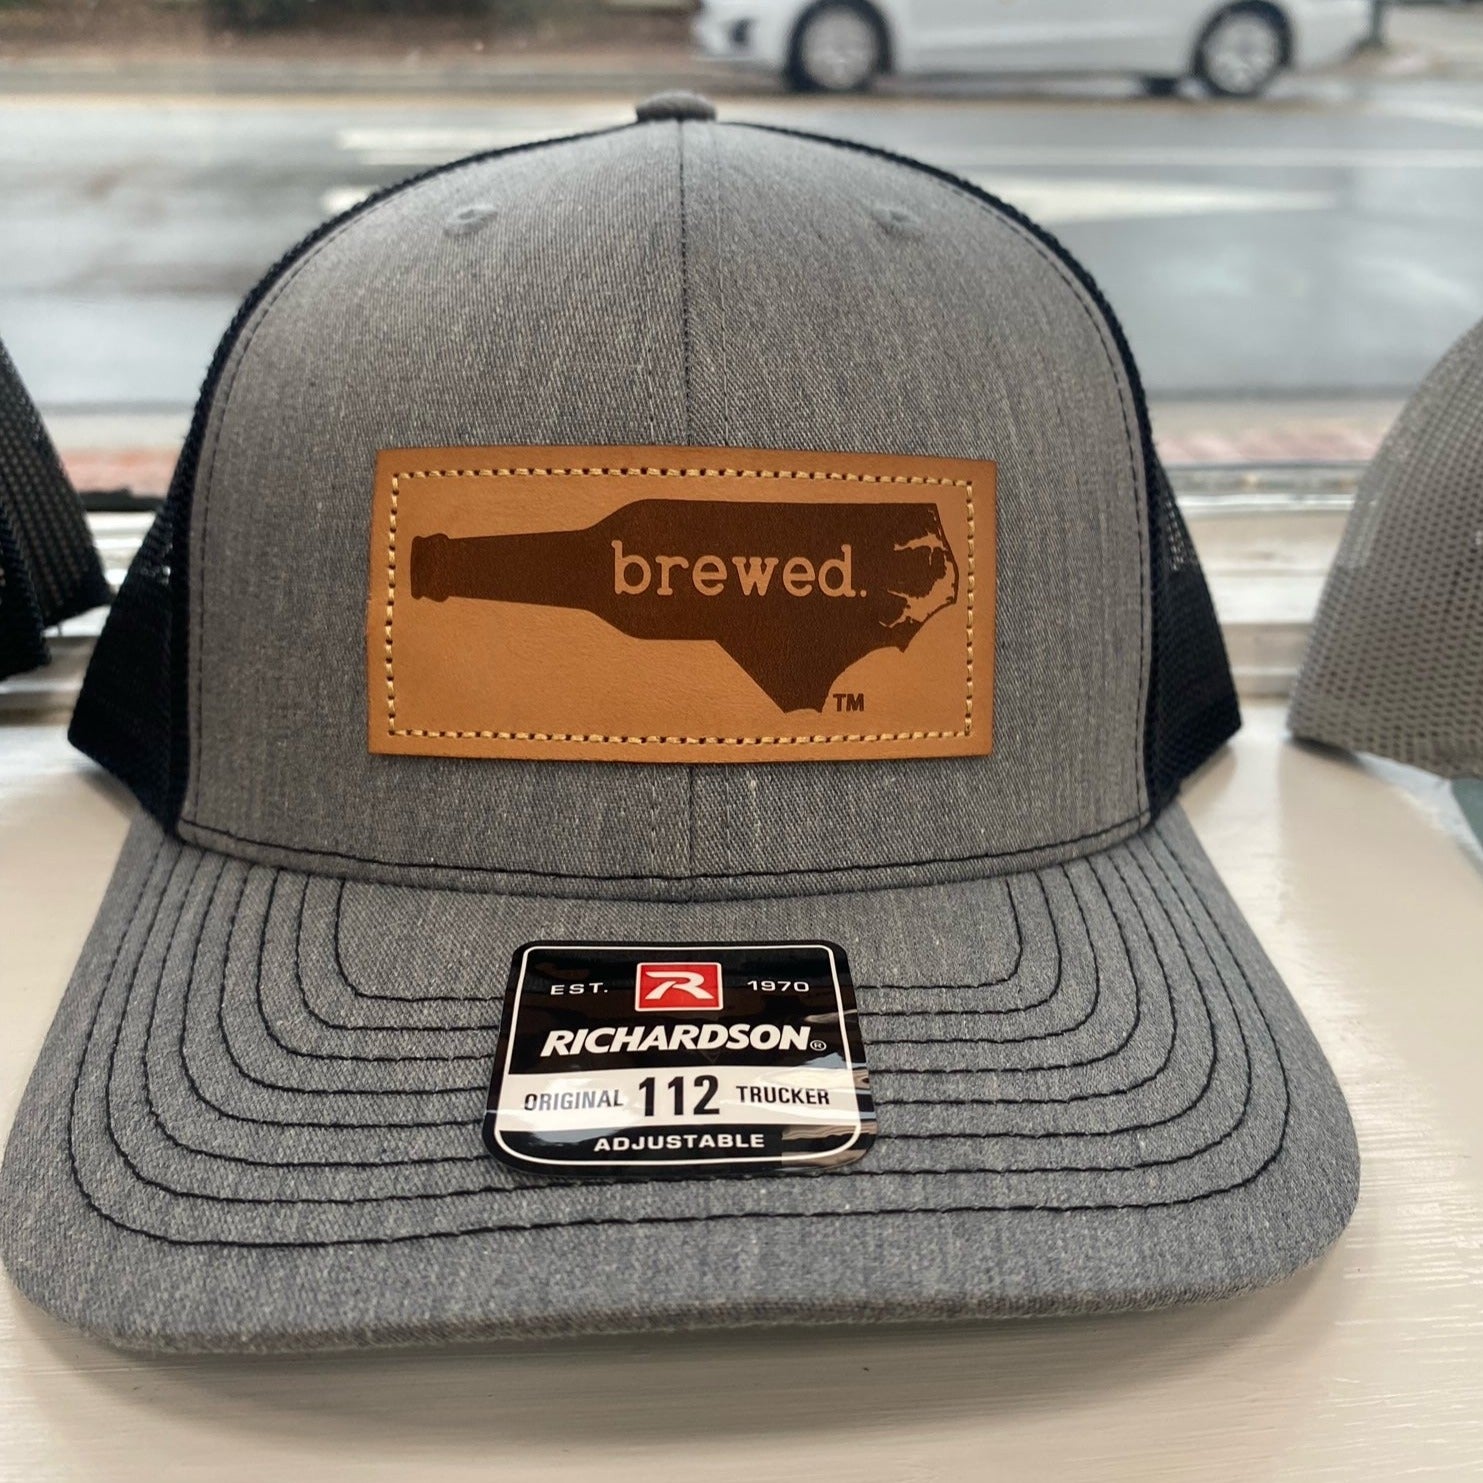 Black and heathered grey hat with a leather patch that says "Brewed" inside the shape of North Carolina. 